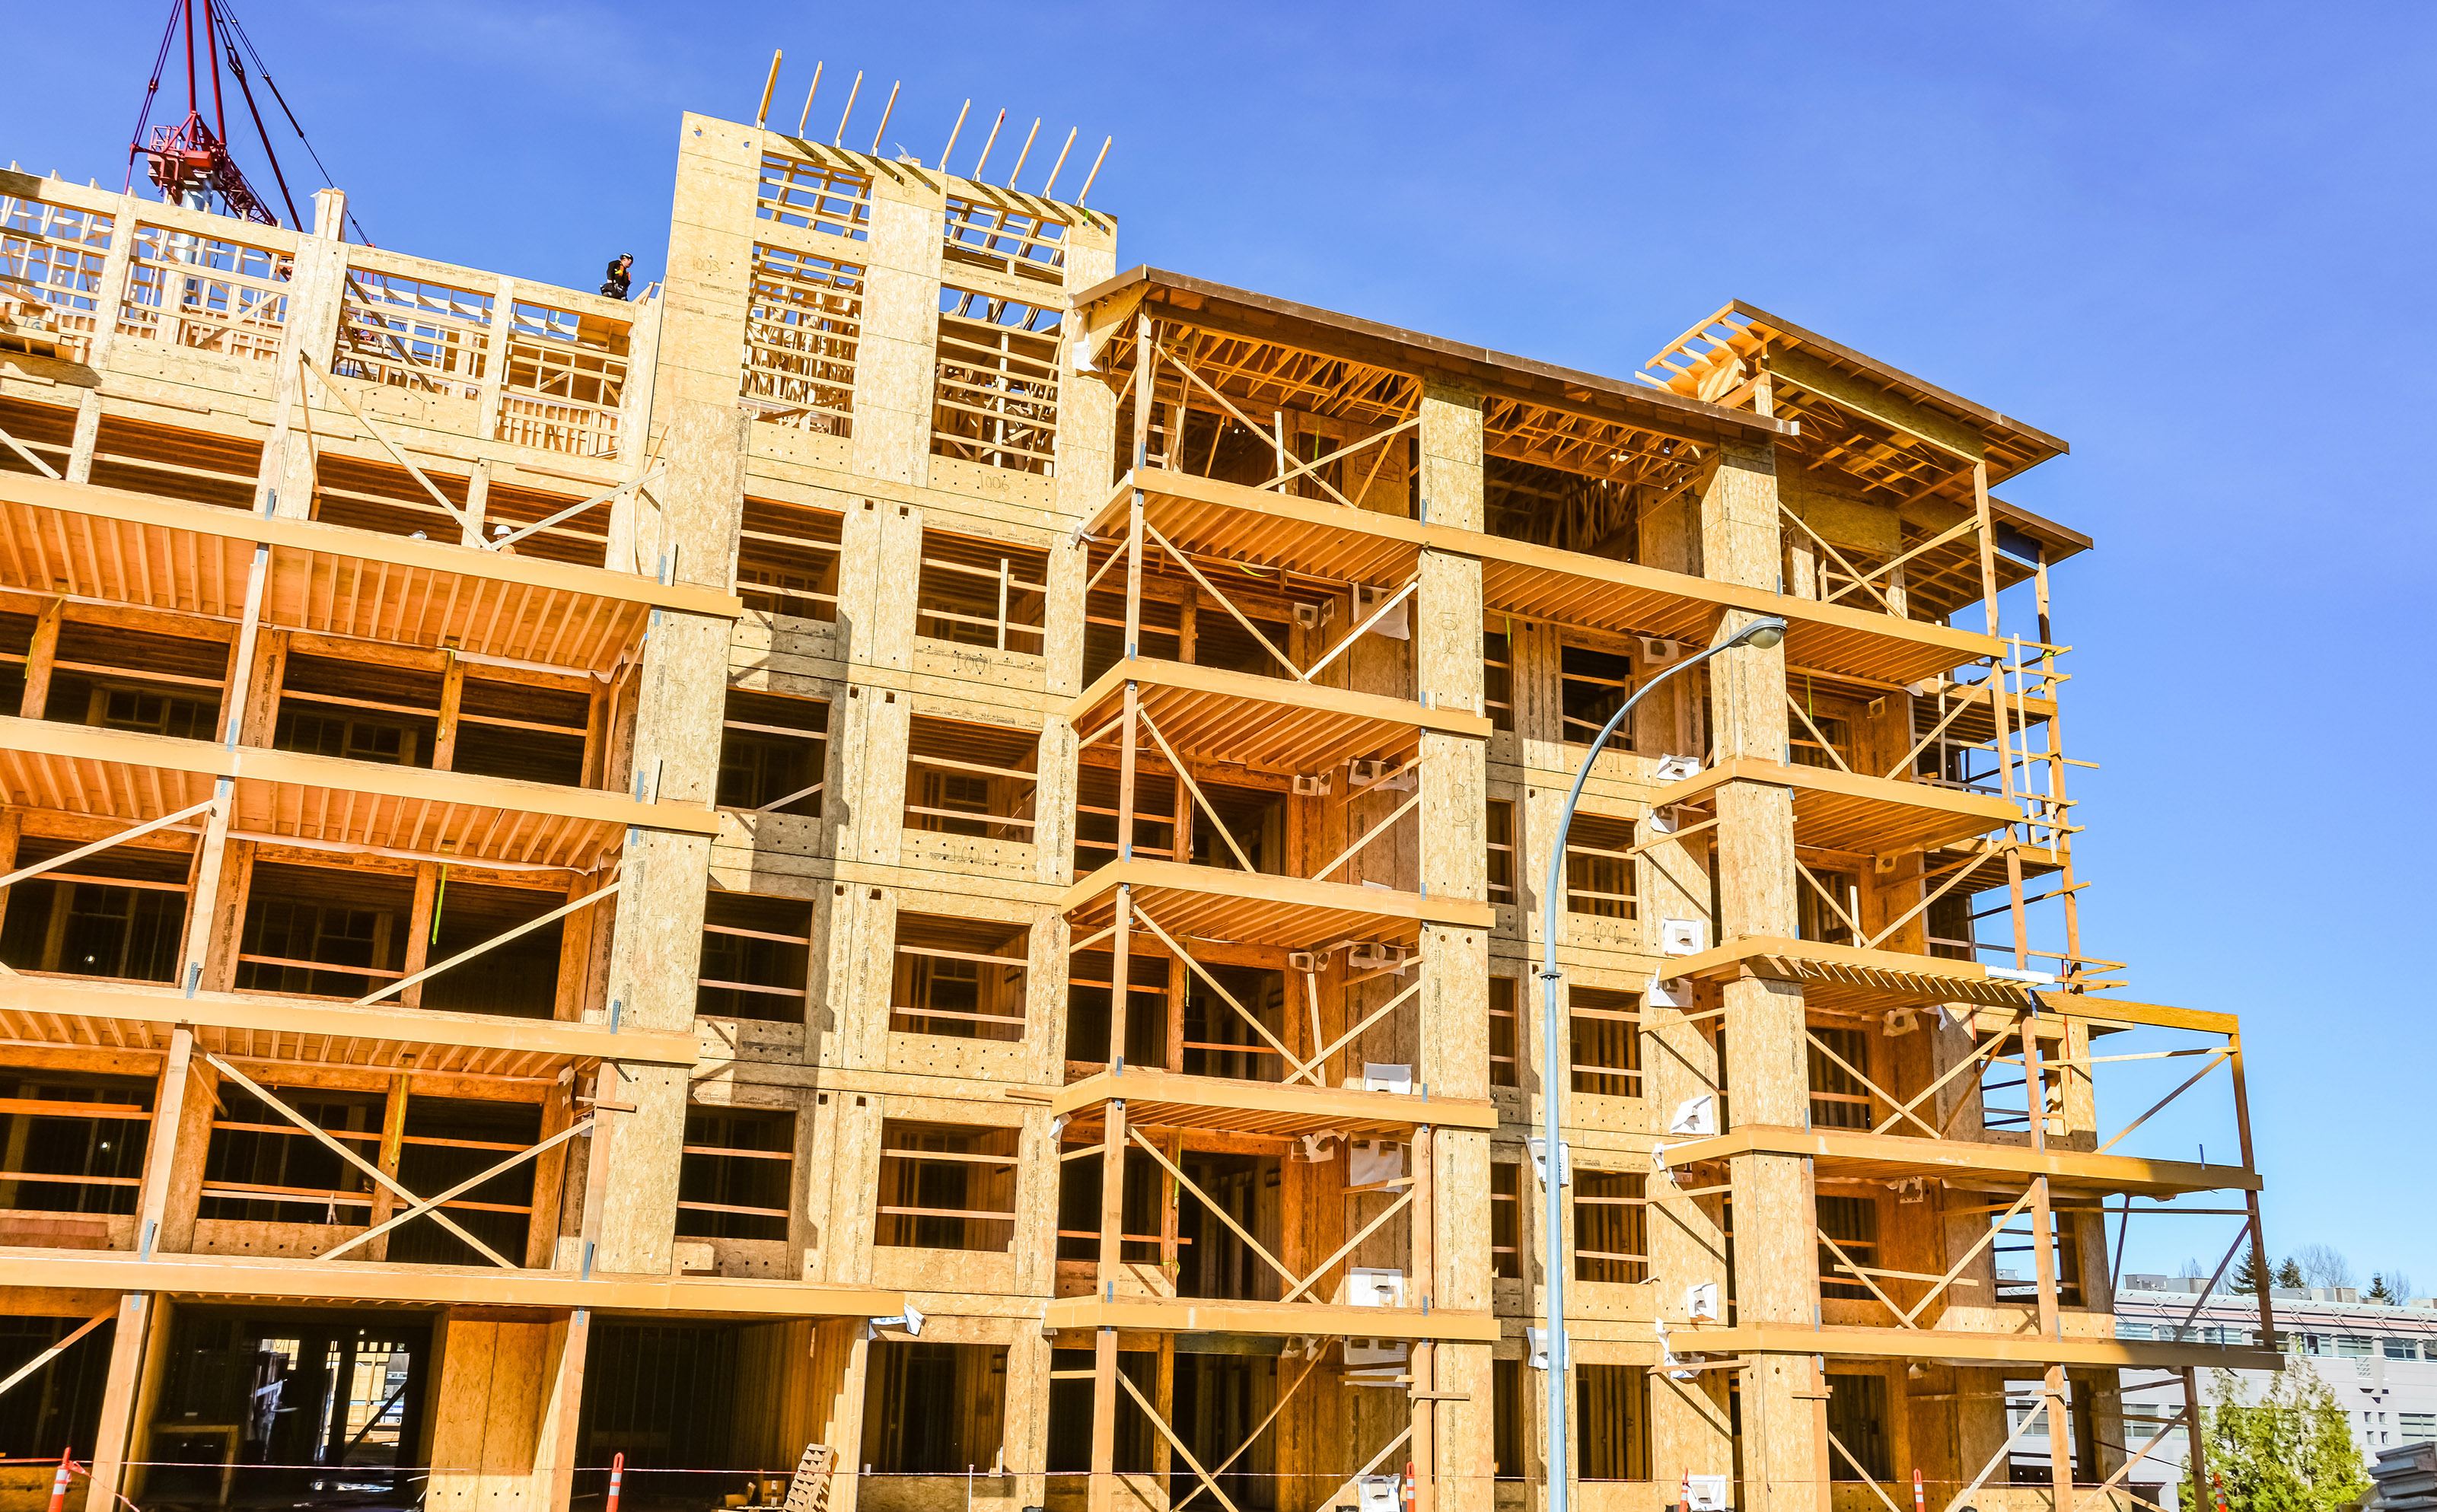 Single-Family Construction Continues to Slide as Multifamily Begins to Cool